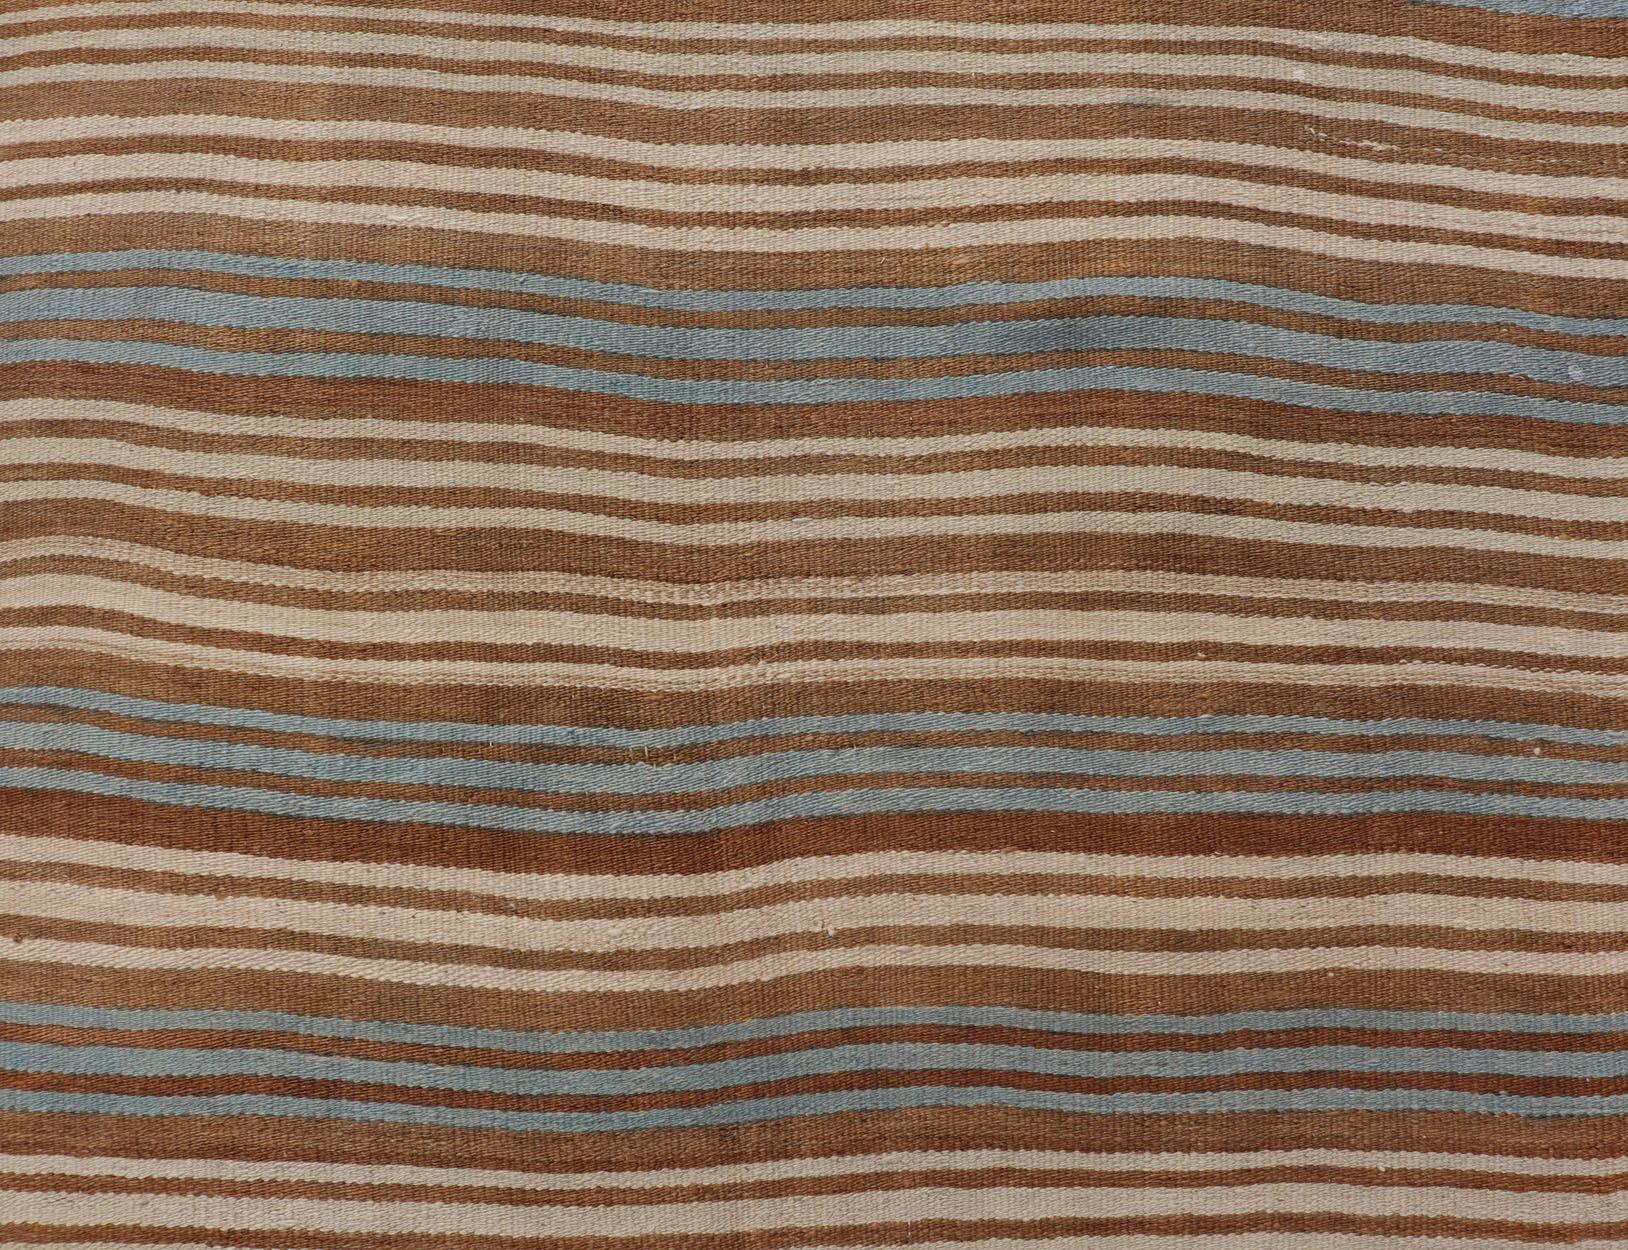 Vintage Turkish Kilim Hand Woven with stripes with brown, blue and cream. Keivan Woven Arts / rug EN-P13763, country of origin / type: Turkey / Kilim, circa Mid-20th Century.

Measures: 4'5 x 10'0.